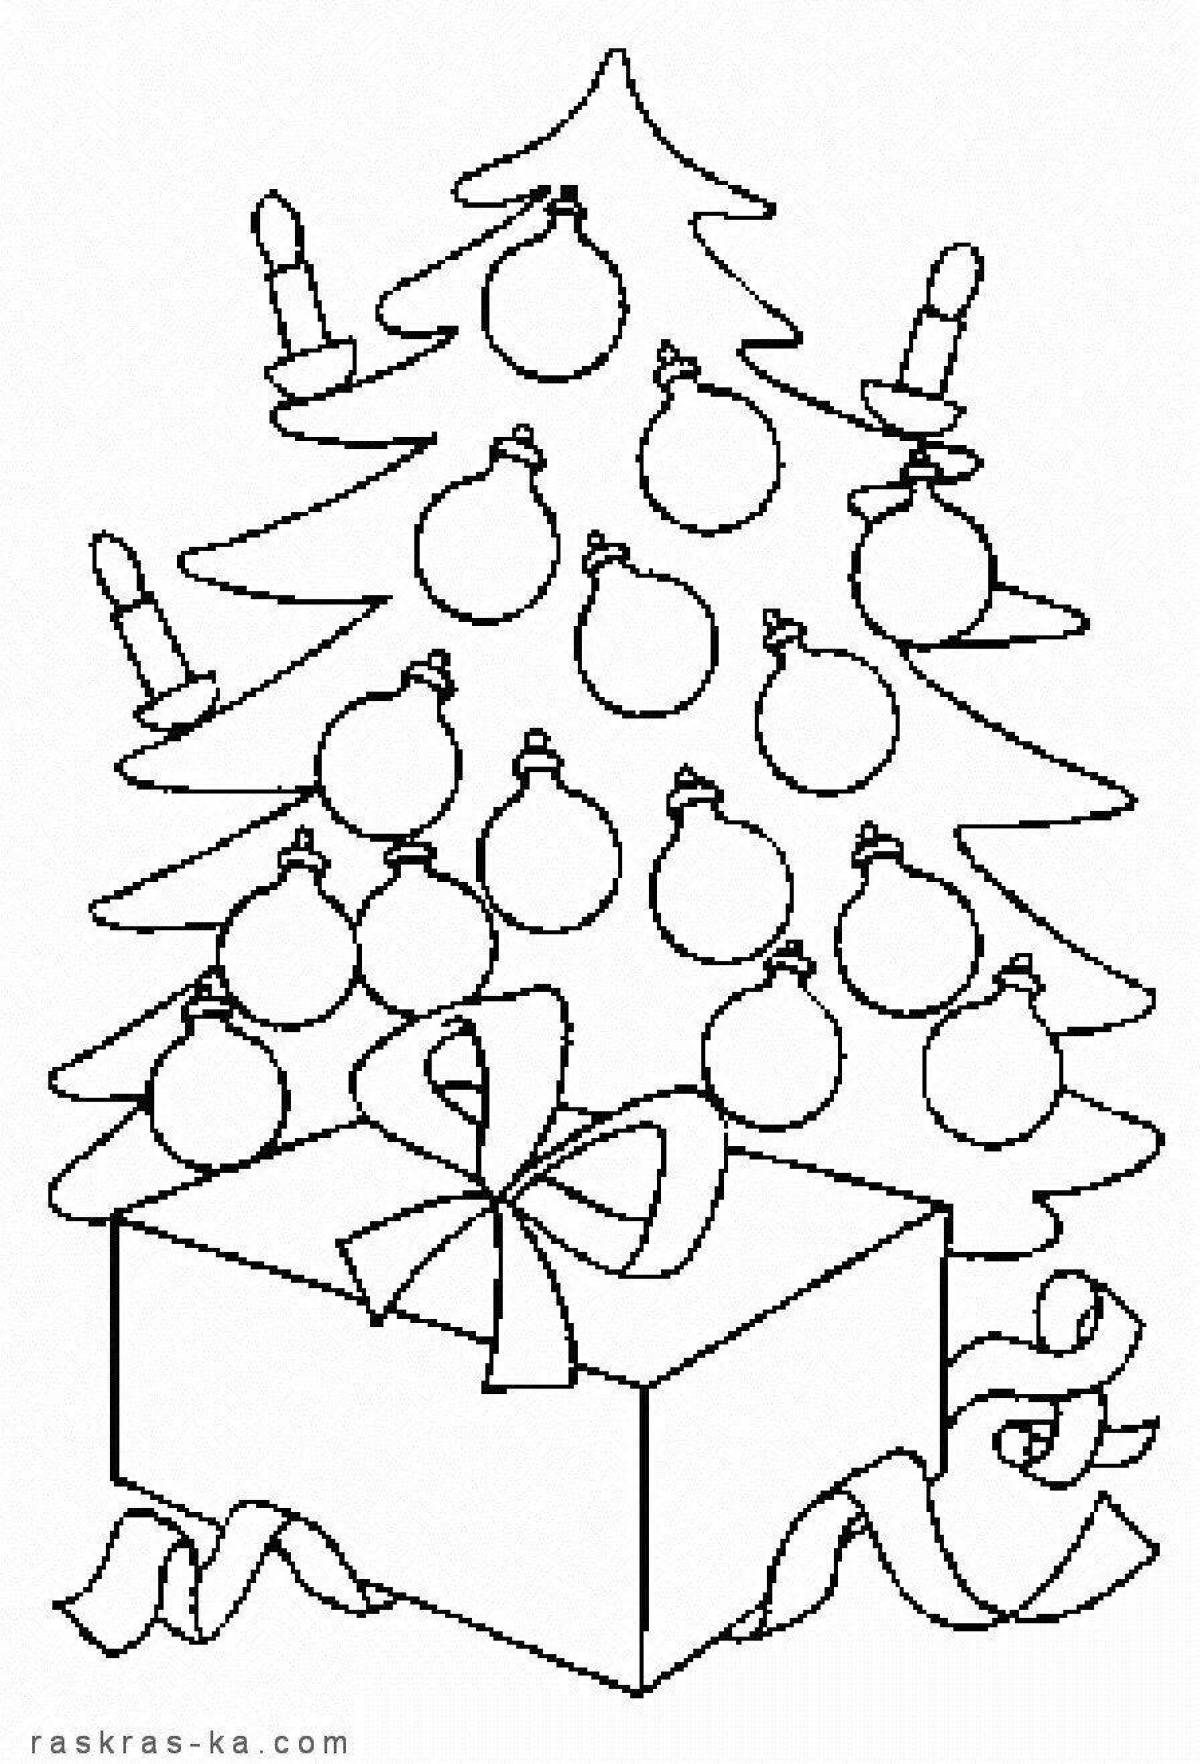 Decorated Christmas tree with balls